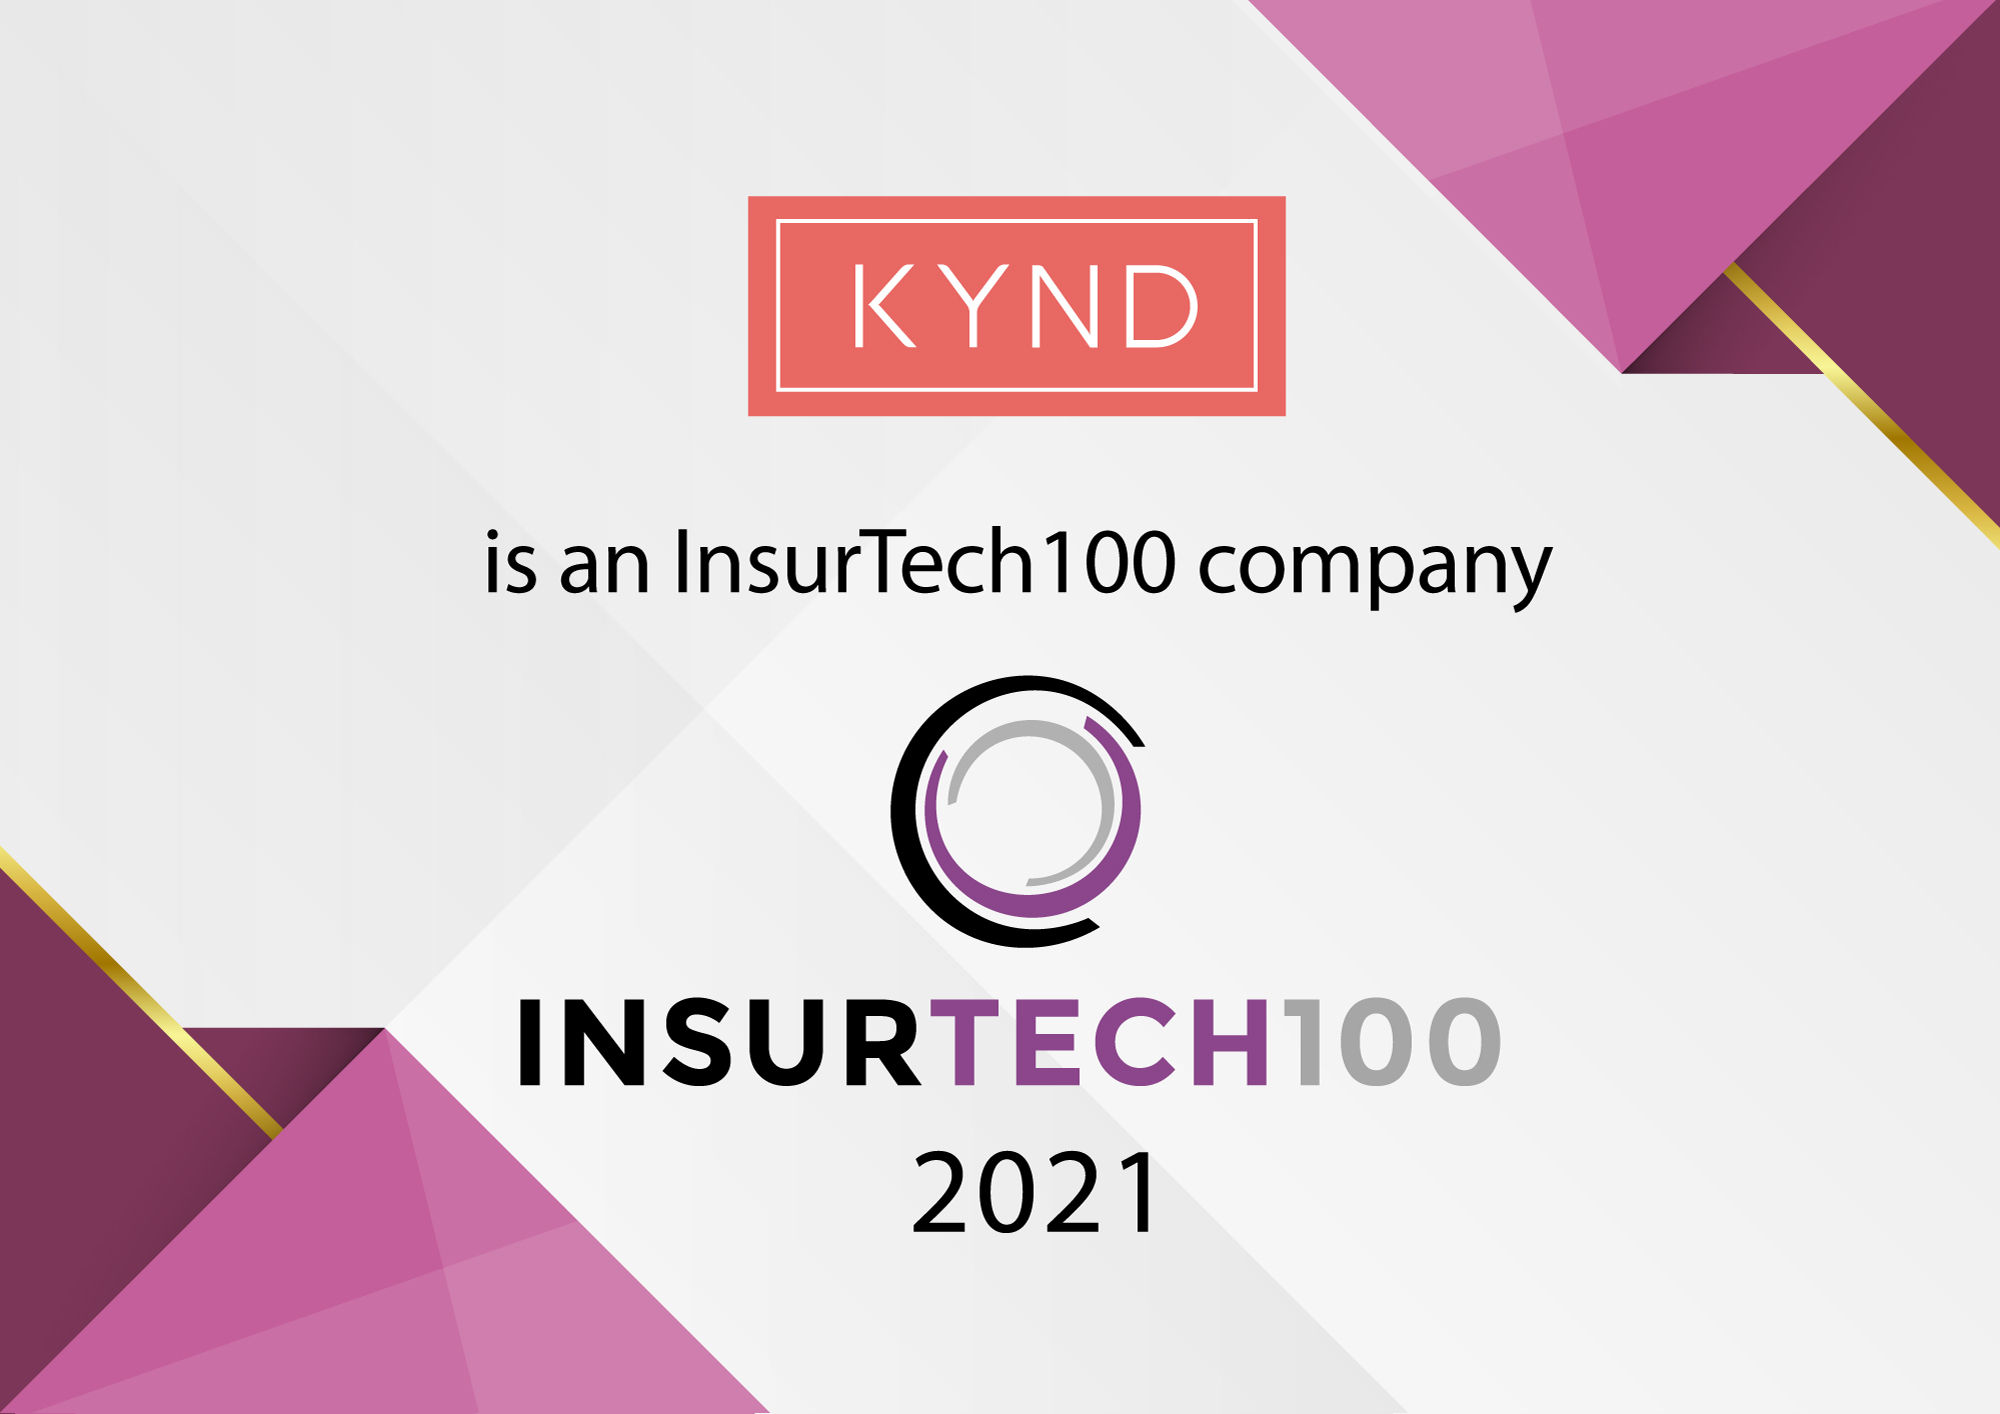 KYND named in the world’s Top 100 InsurTech companies for second consecutive year